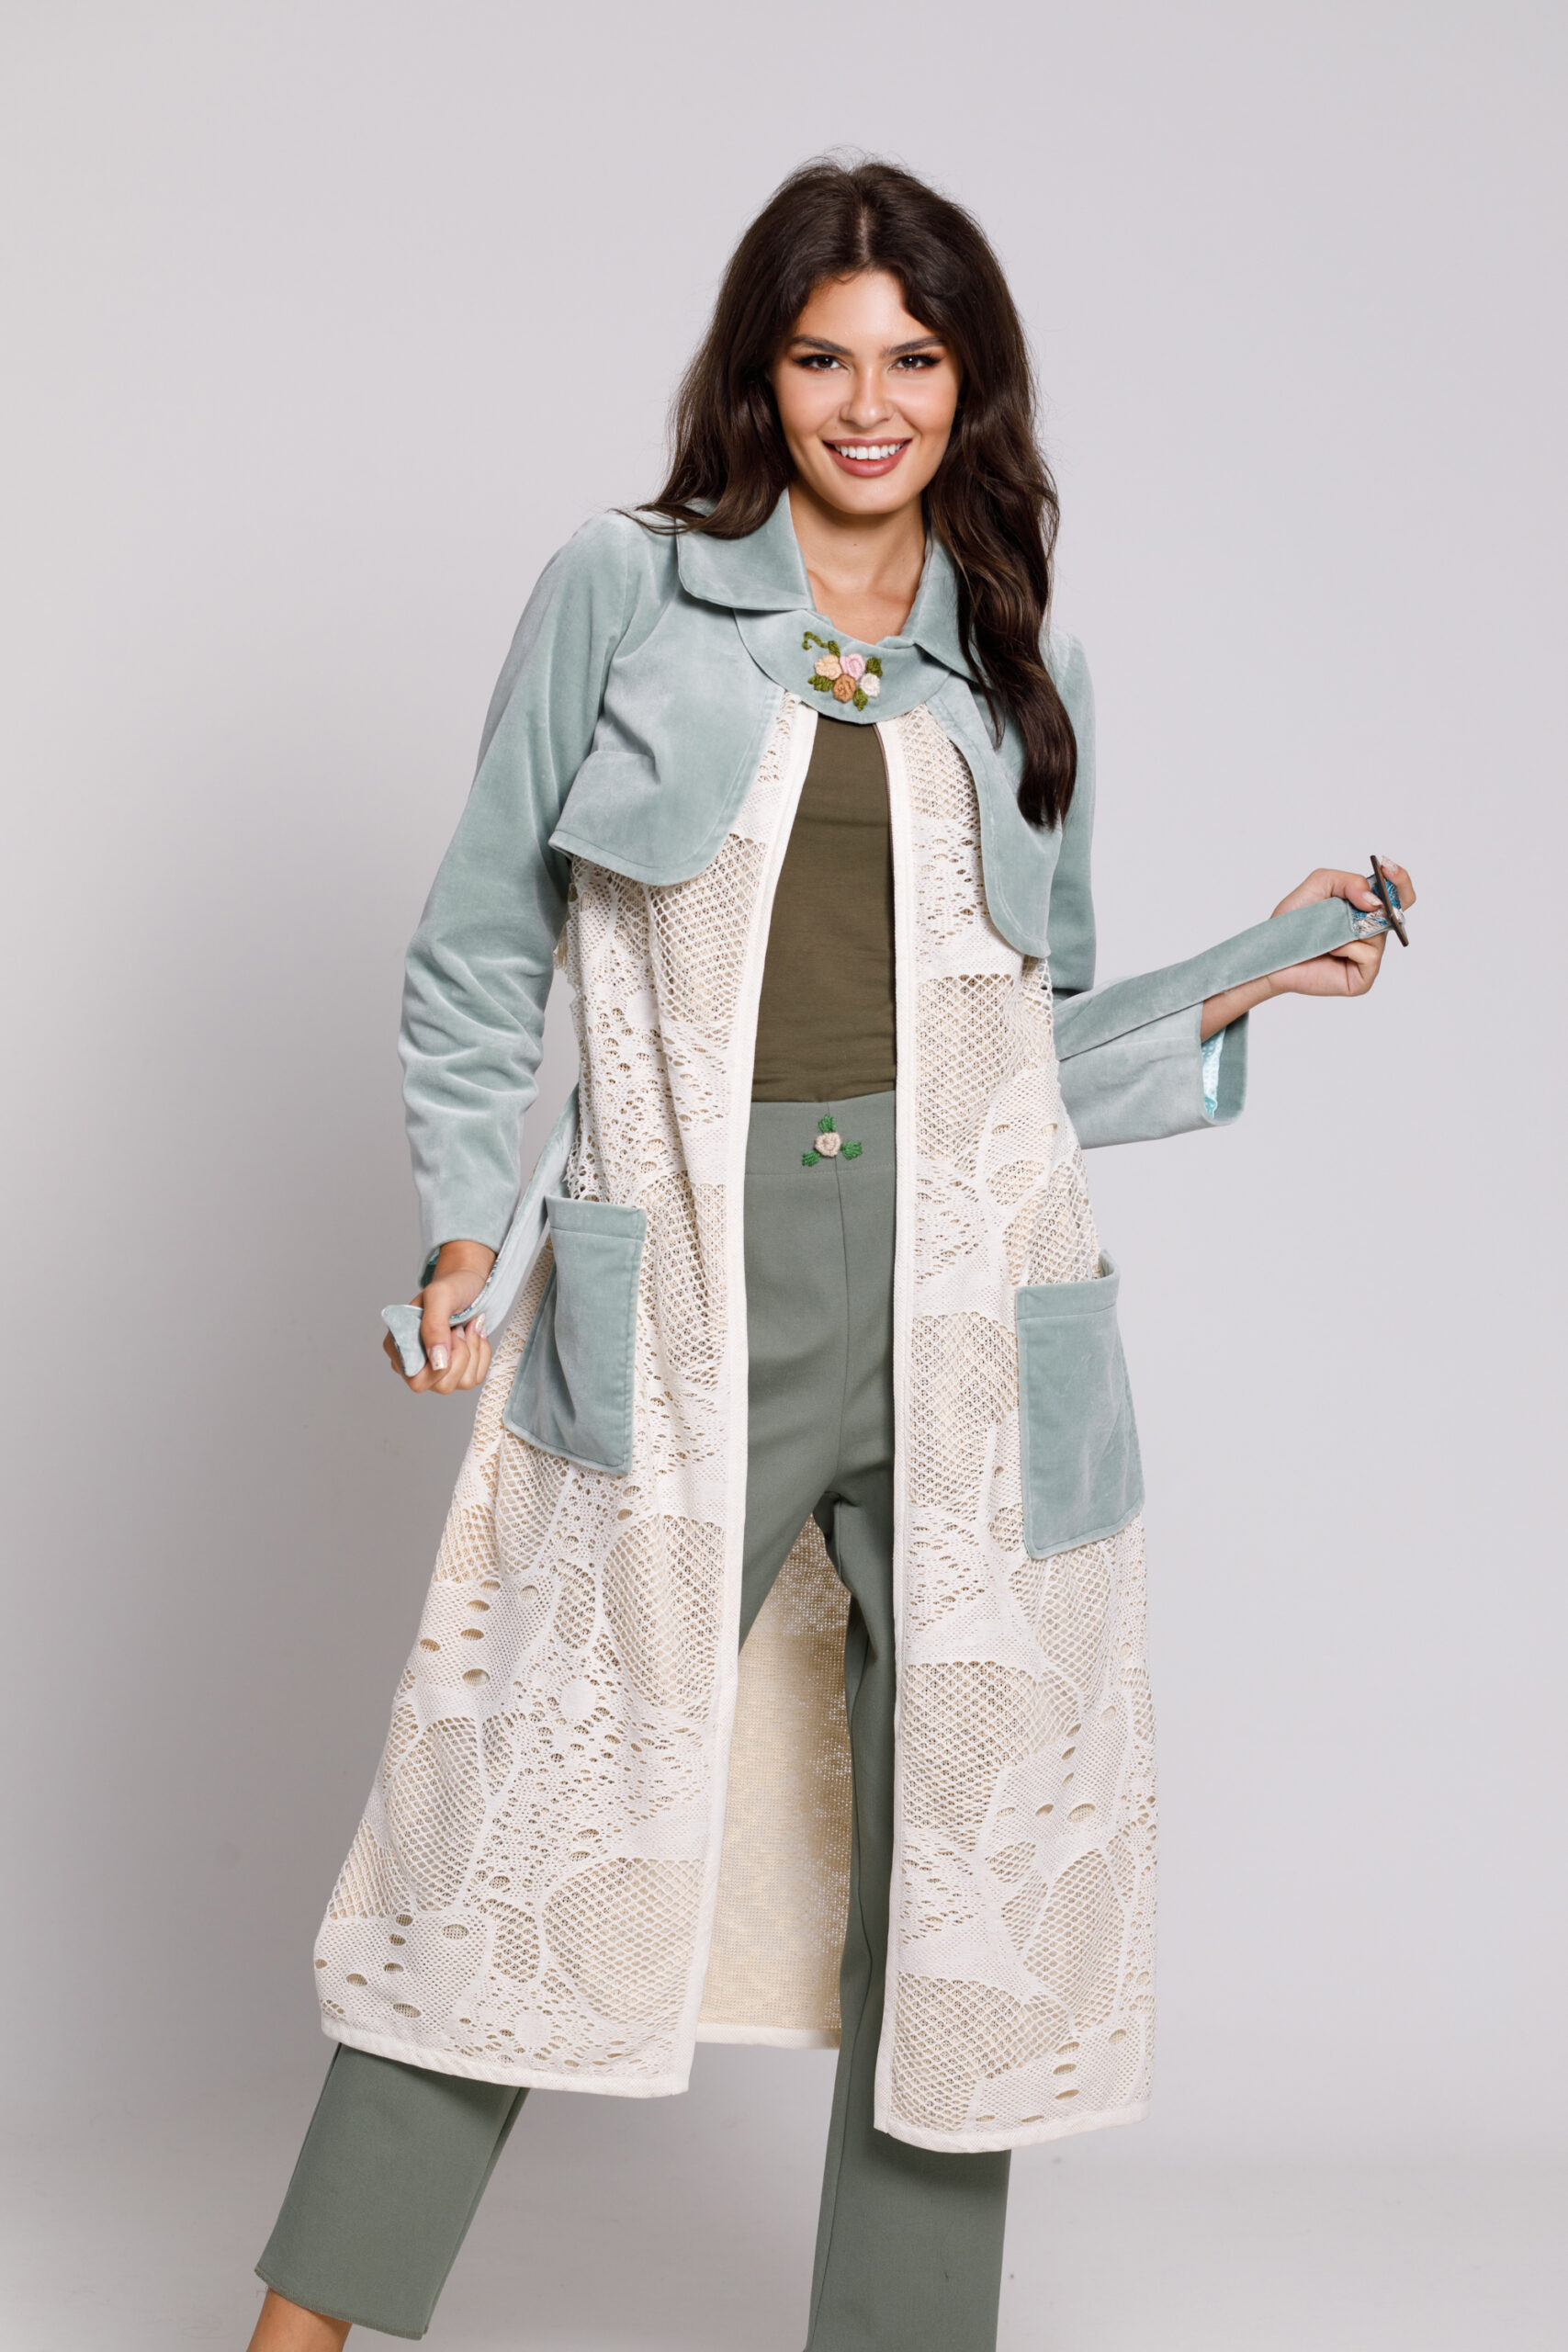 KATO casual overcoat in mint velvet and lace. Natural fabrics, original design, handmade embroidery